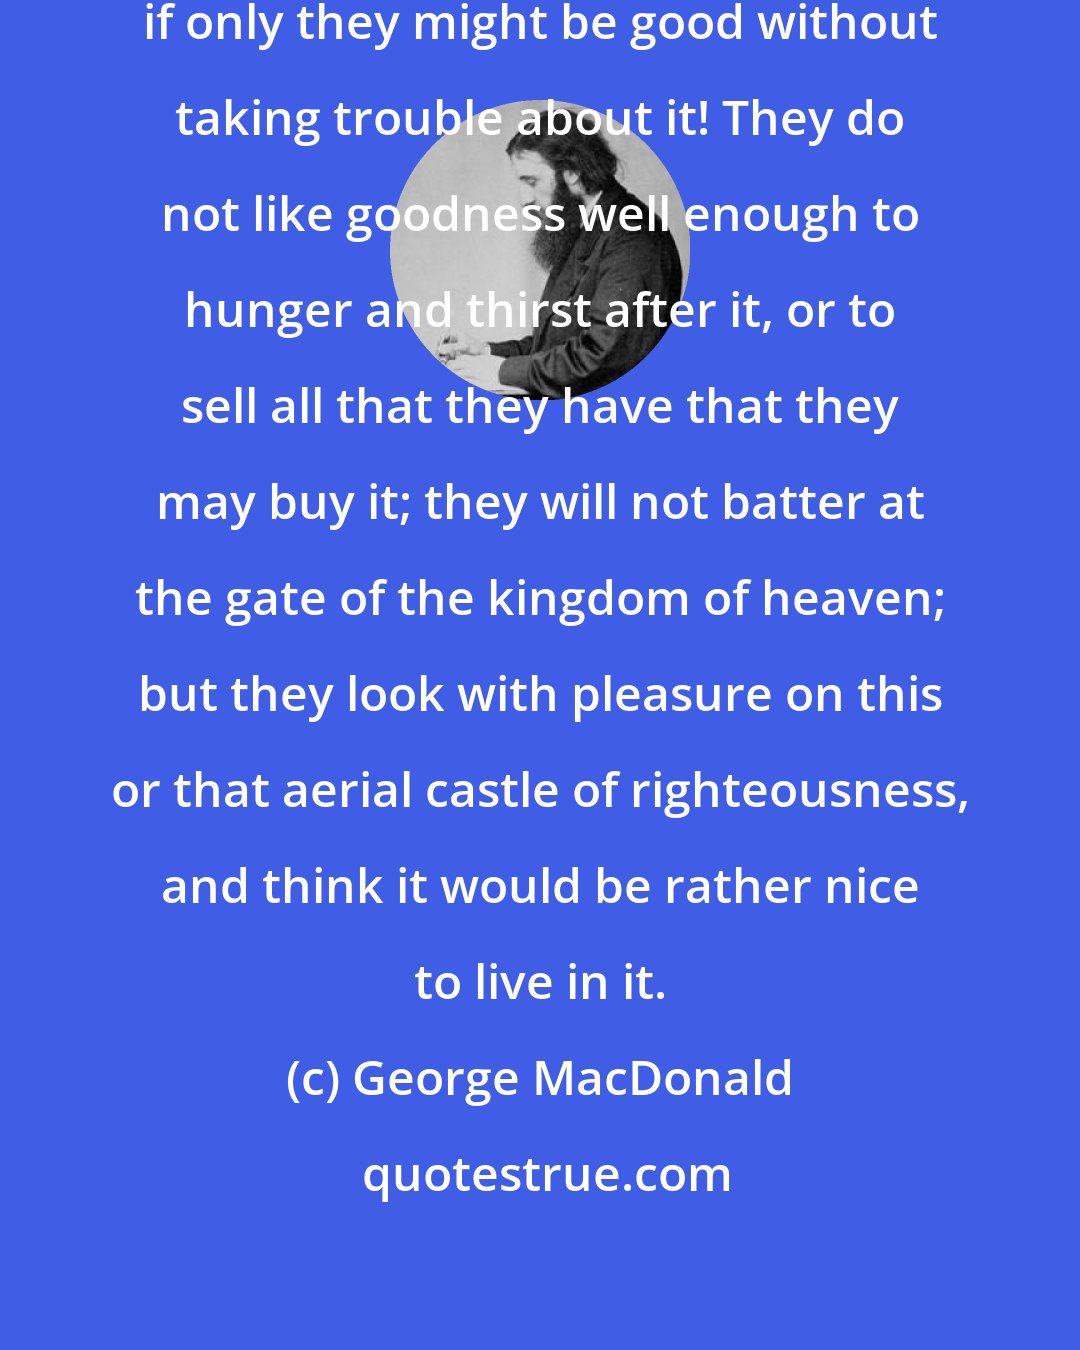 George MacDonald: How many people would like to be good, if only they might be good without taking trouble about it! They do not like goodness well enough to hunger and thirst after it, or to sell all that they have that they may buy it; they will not batter at the gate of the kingdom of heaven; but they look with pleasure on this or that aerial castle of righteousness, and think it would be rather nice to live in it.